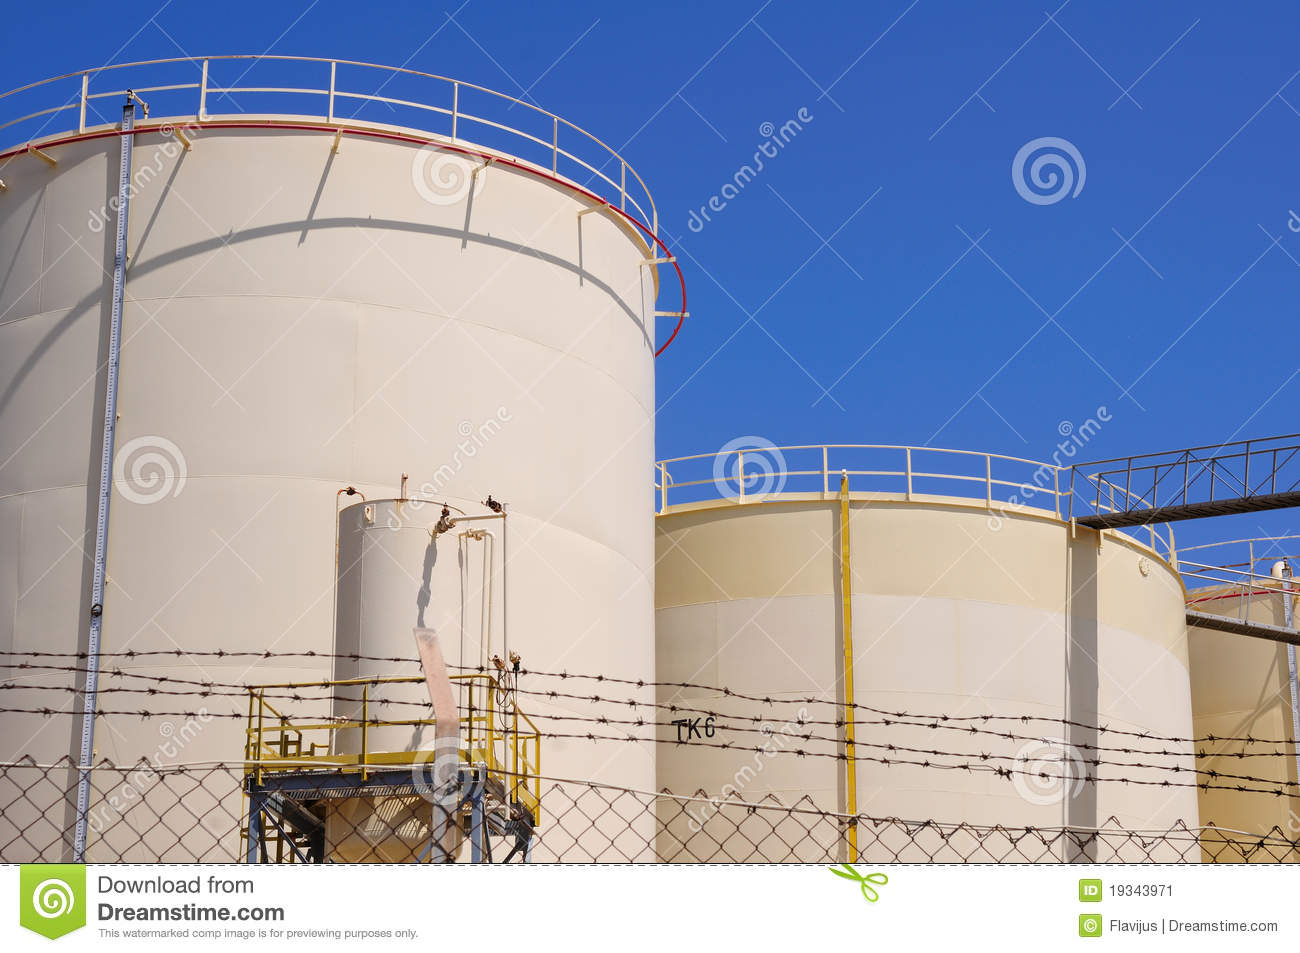 Oil And Gas Industry  Oil Reservoirs On A Petrochemical Plant 